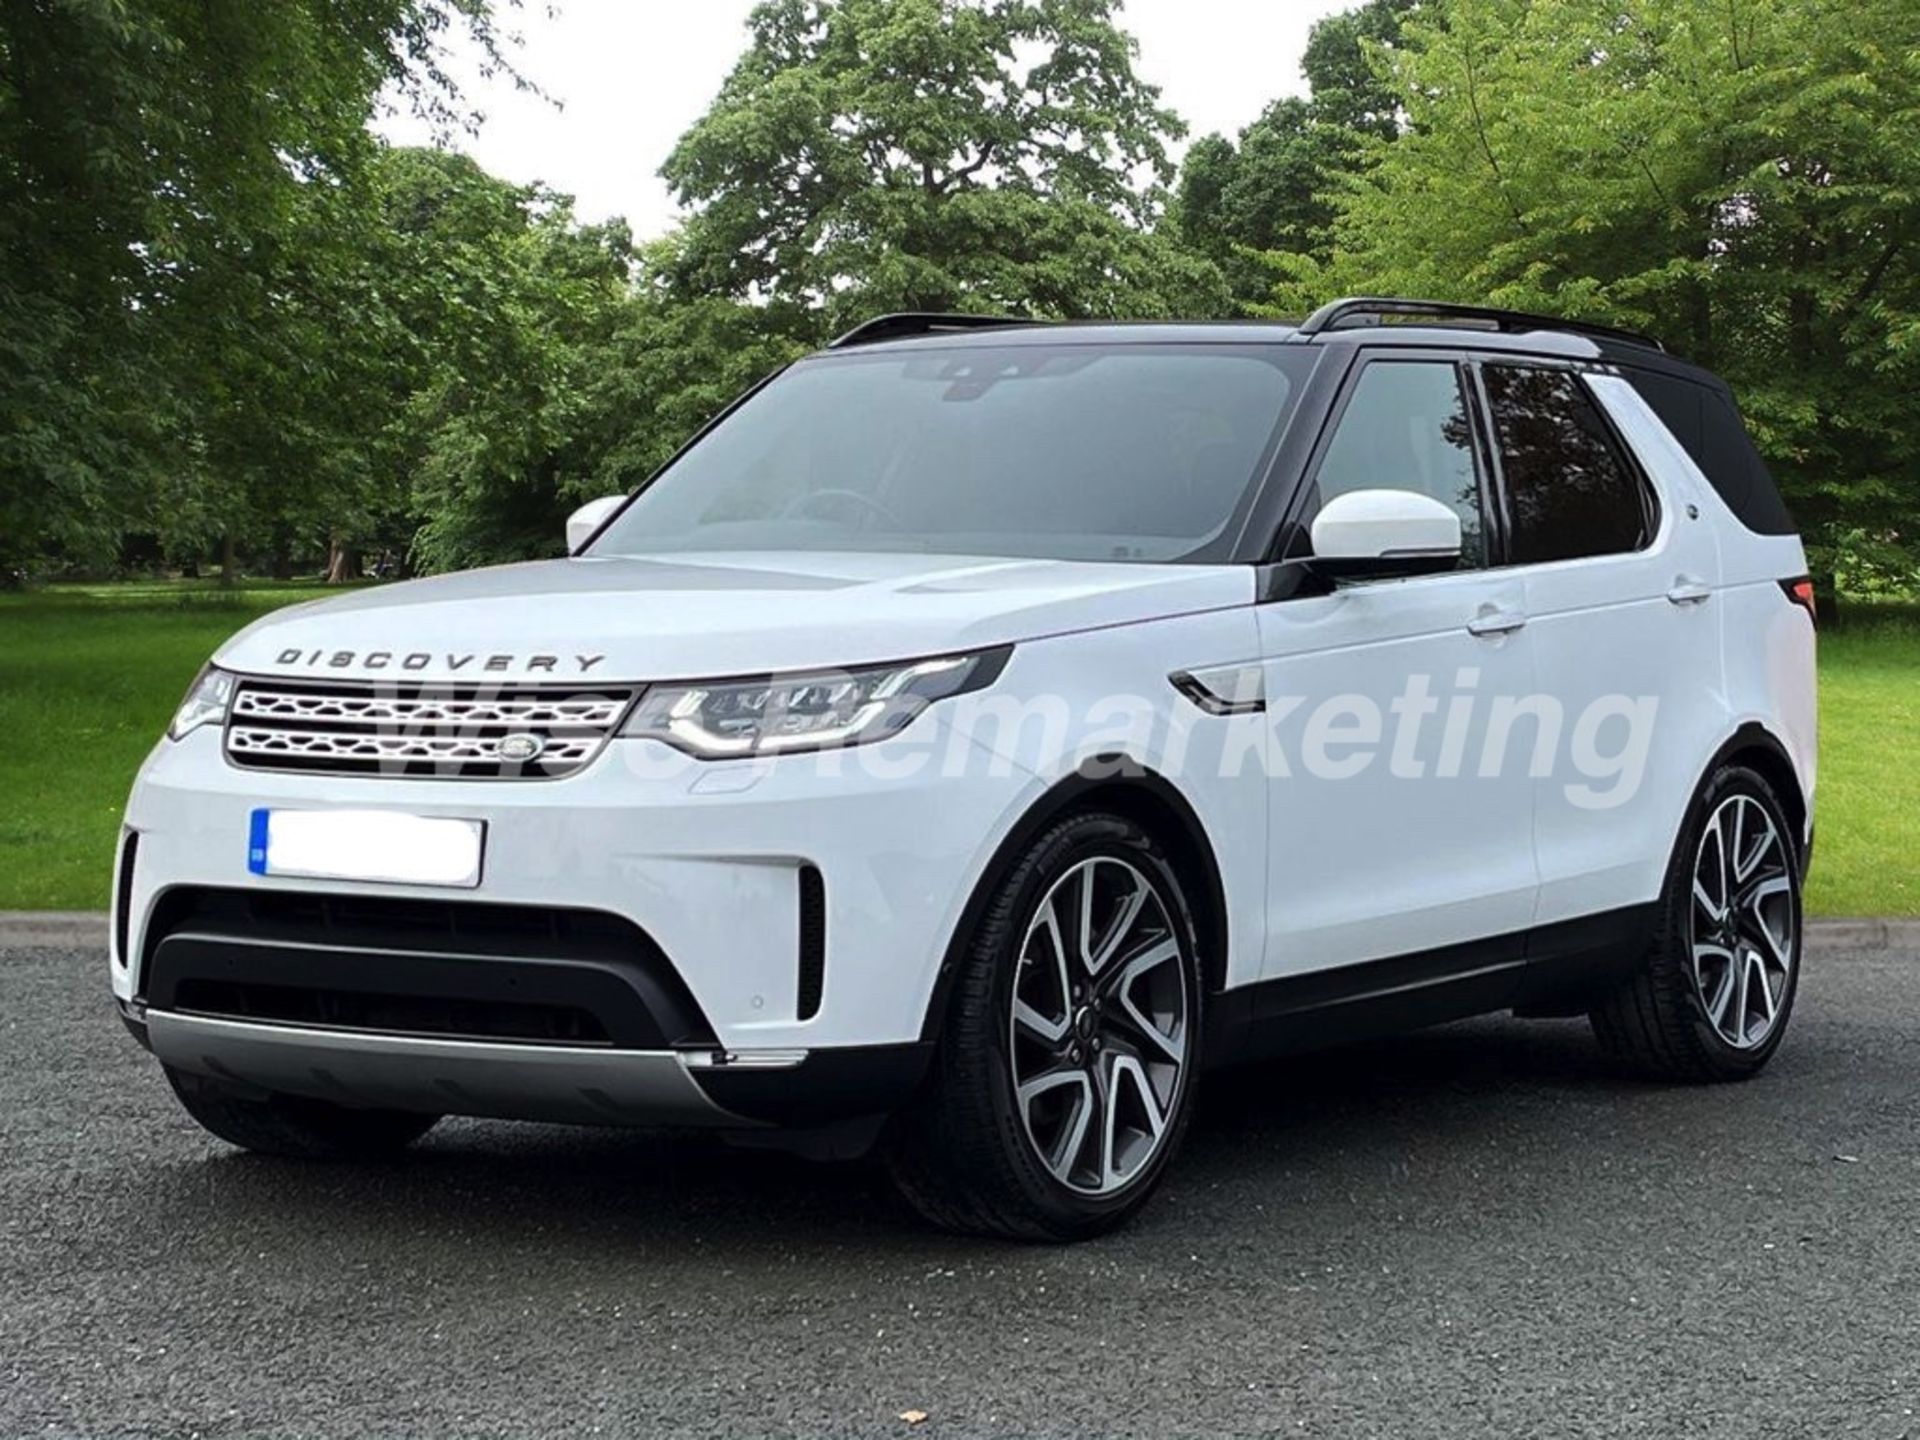 Land Rover Discovery 5 * SUV* (2017 - 67 Reg) *3.0 TD6 - 8 Speed Automatic* (ALL NEW MODEL) - Image 3 of 9